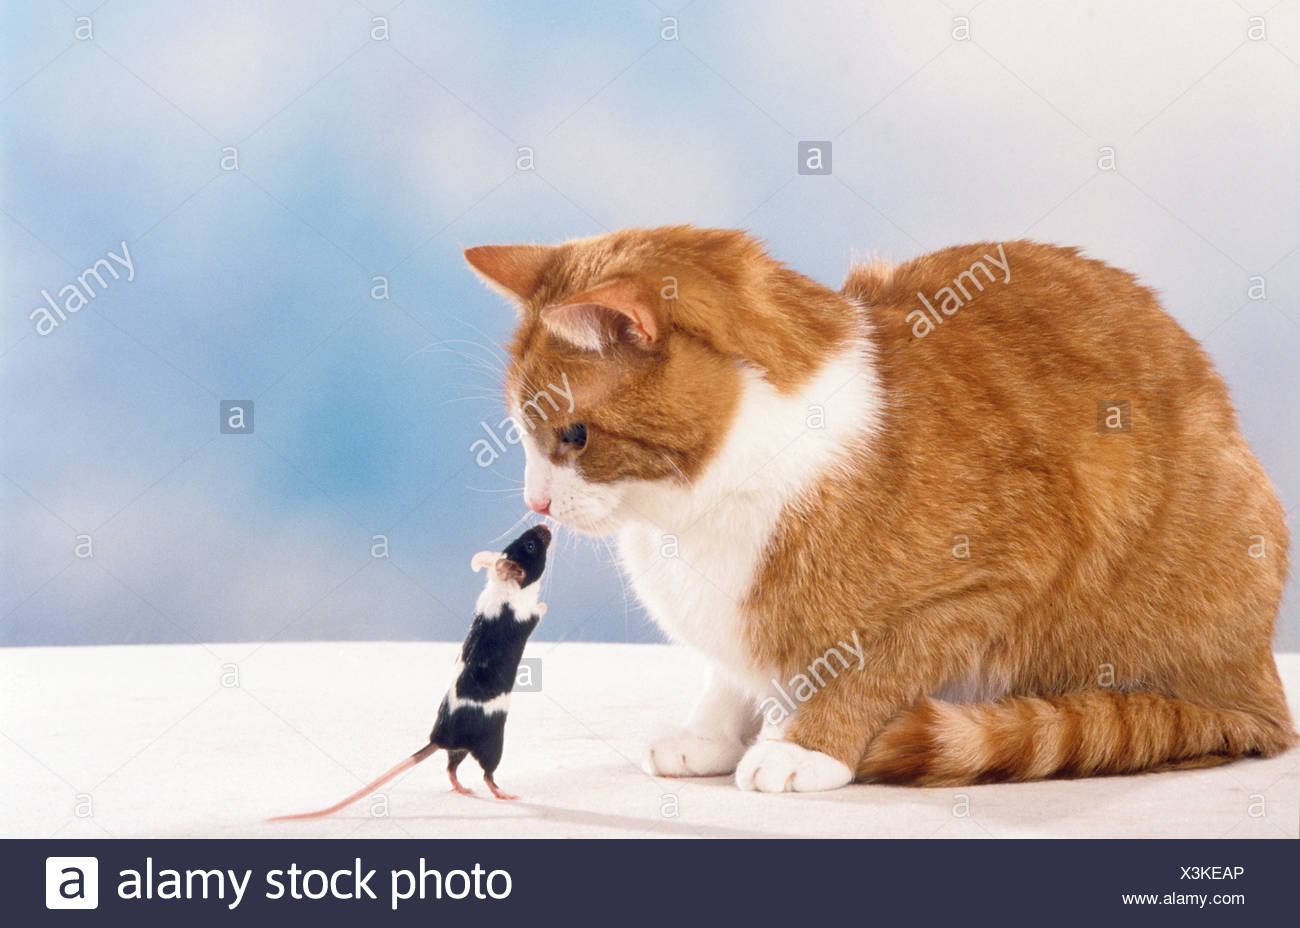 Animal Friendship Cat And Mouse Stock Photo Alamy